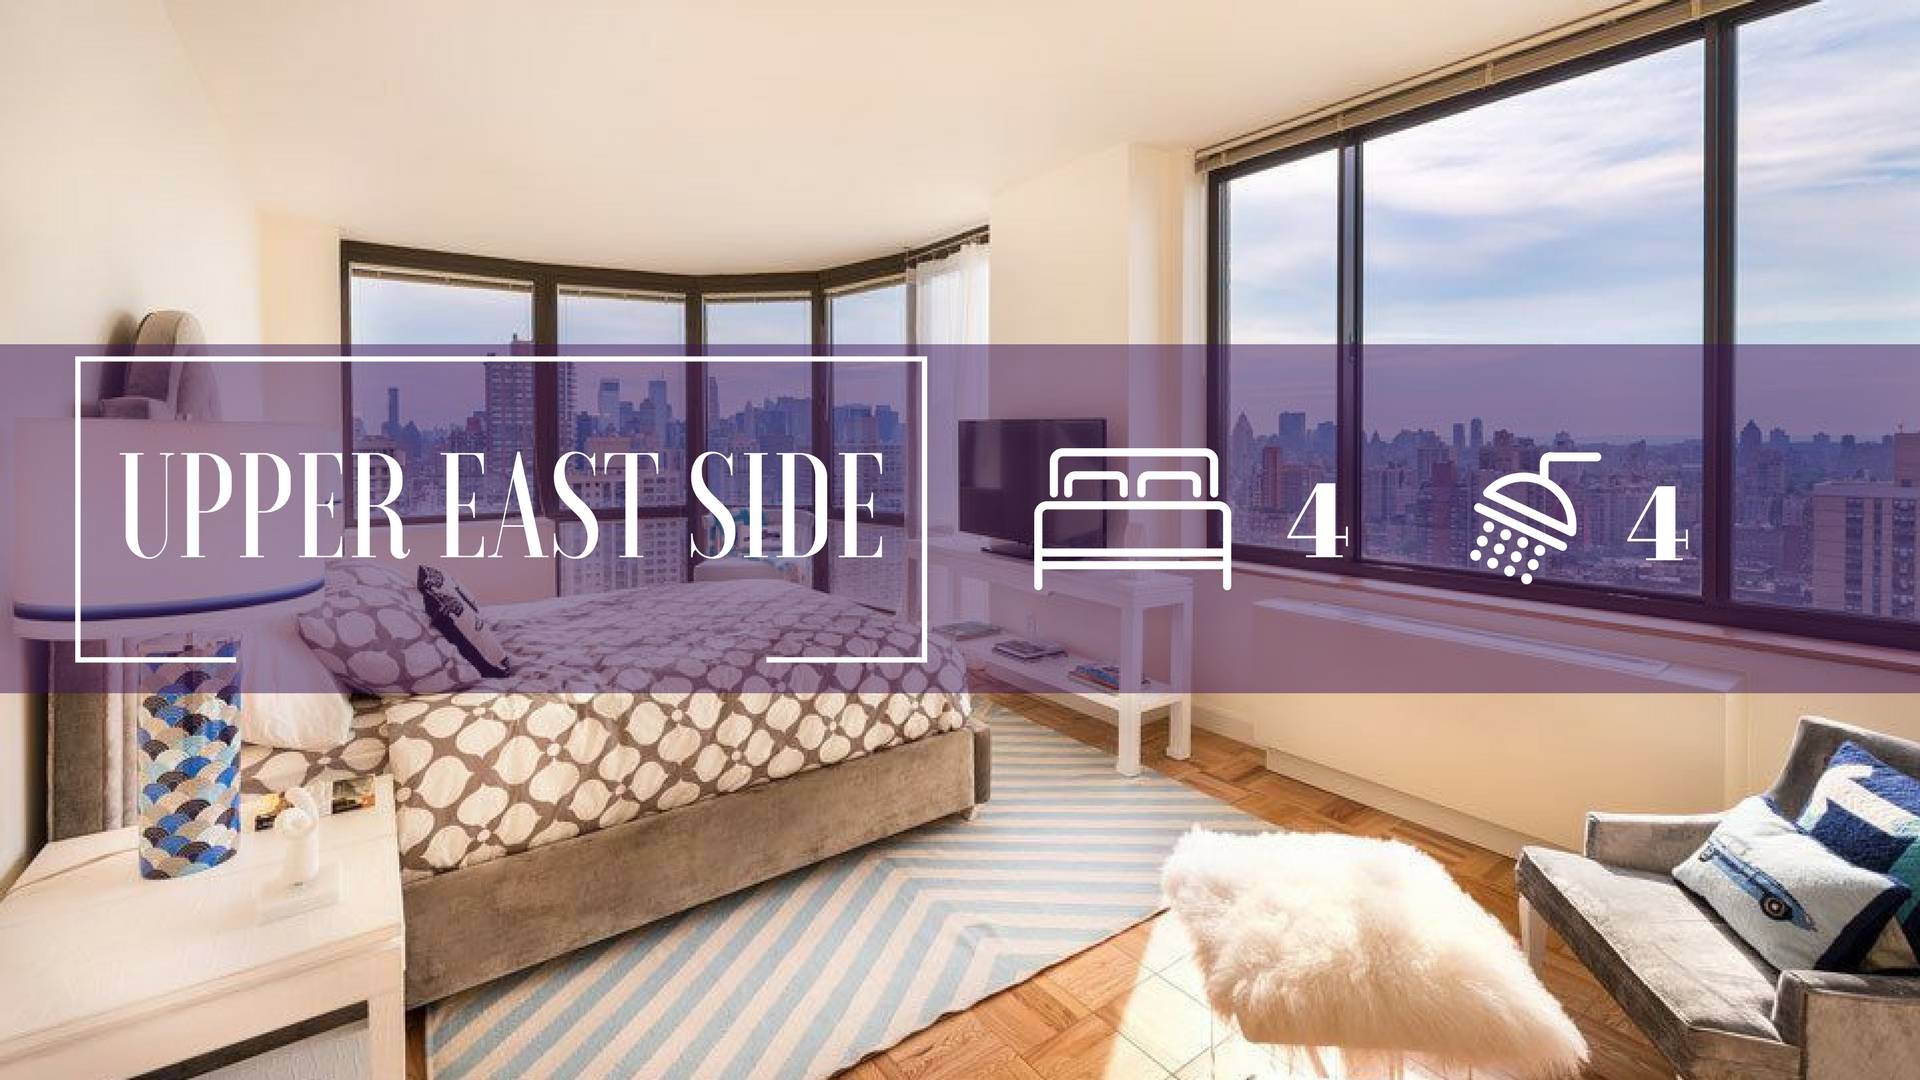 Penthouse Flex 4 bedroom/ 4 bathroom home with 10 foot ceilings, panoramic views of the East River, Central Park and the Manhattan skyline!